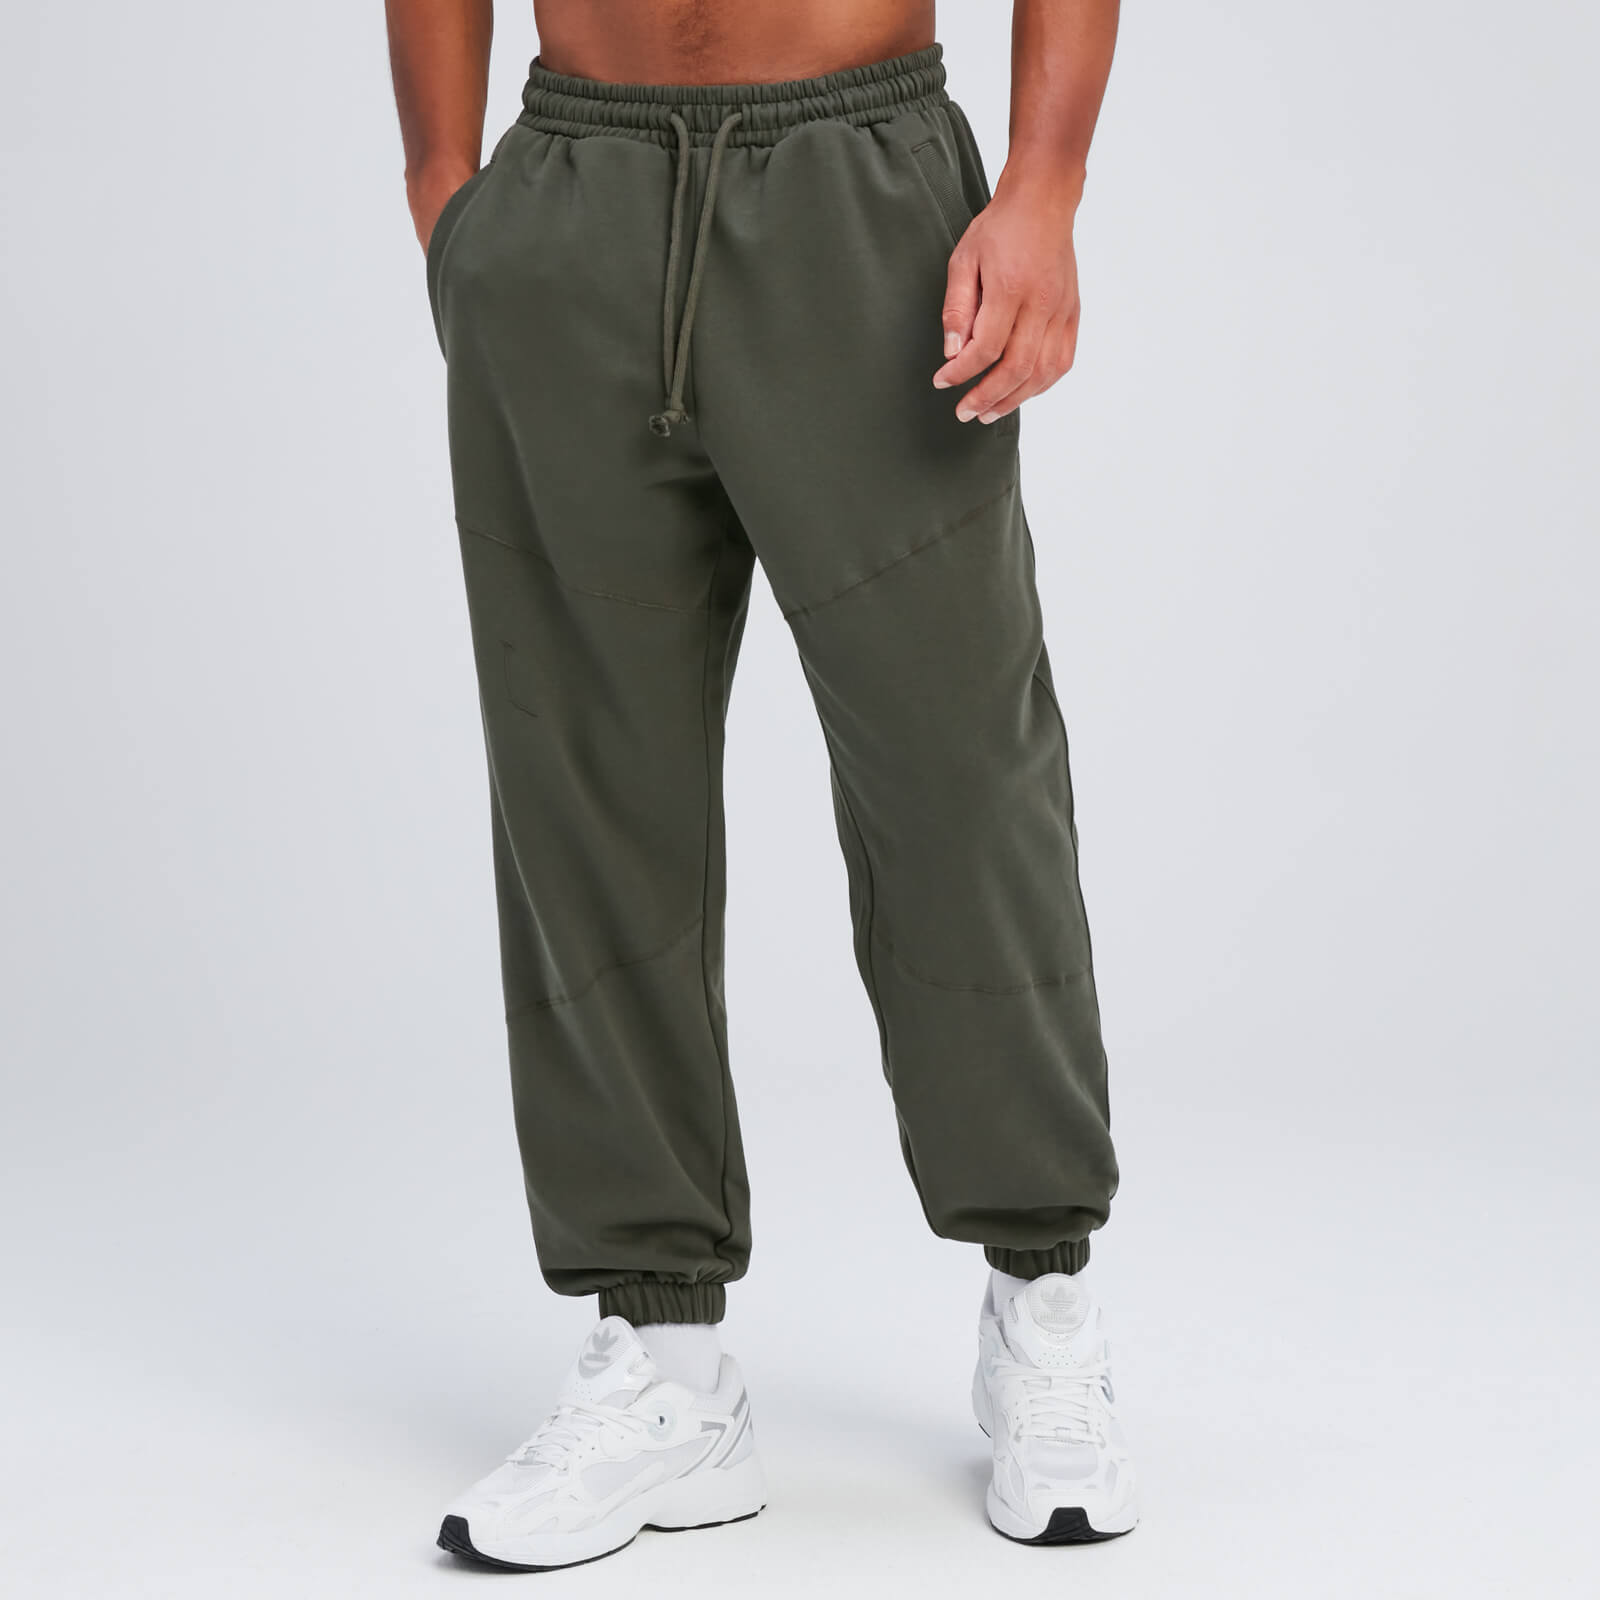 Jogging oversize MP Rest Day pour hommes – Vert taupe